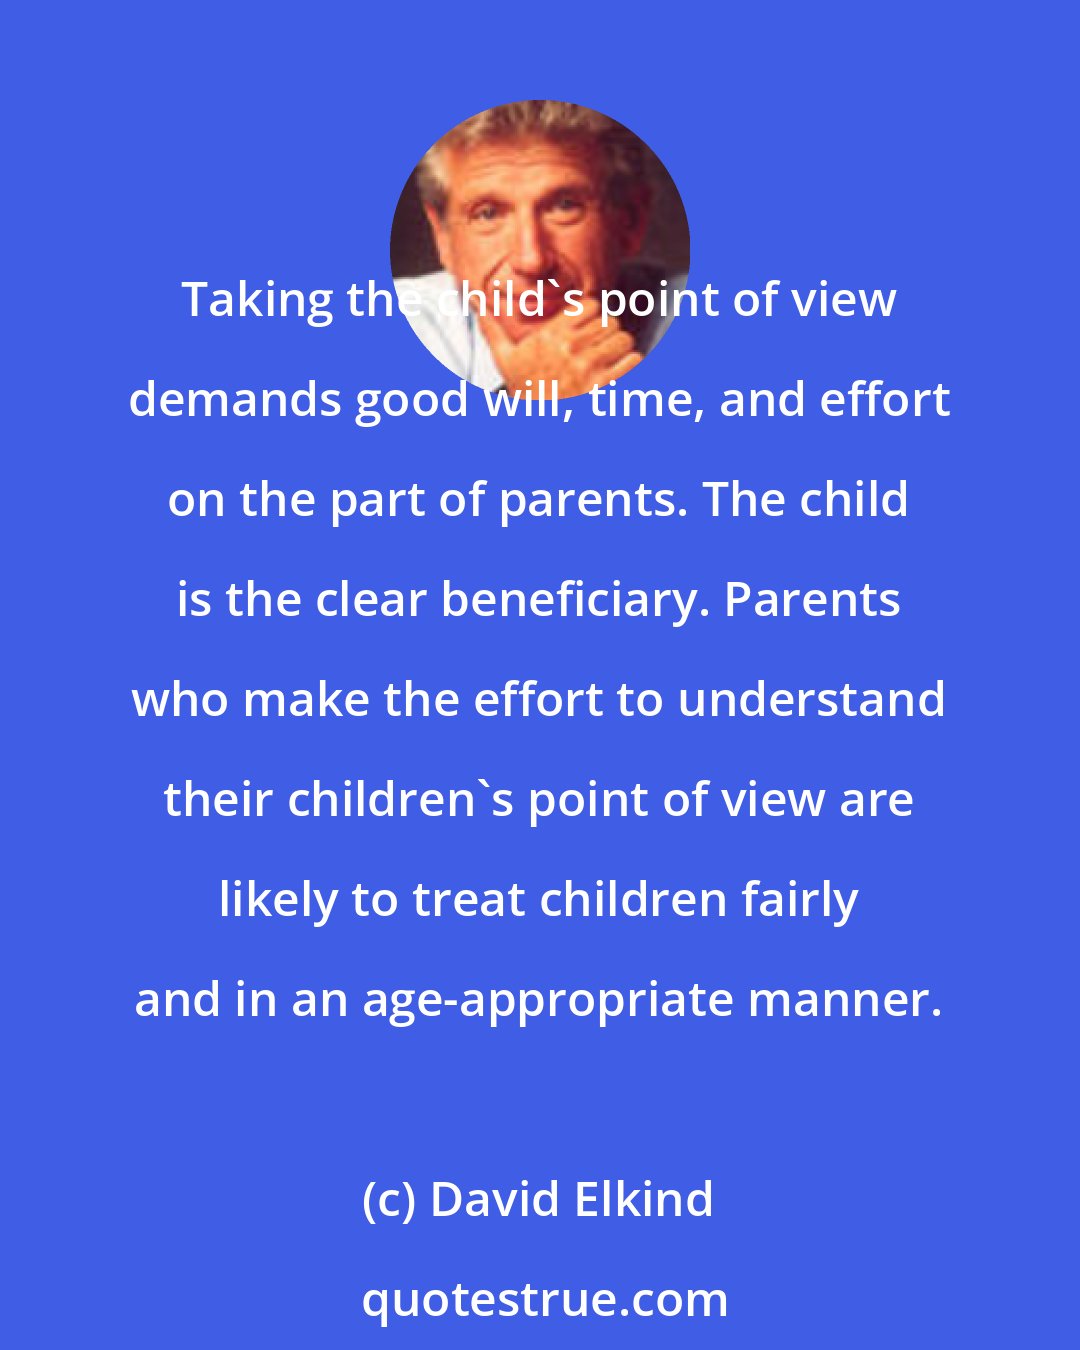 David Elkind: Taking the child's point of view demands good will, time, and effort on the part of parents. The child is the clear beneficiary. Parents who make the effort to understand their children's point of view are likely to treat children fairly and in an age-appropriate manner.